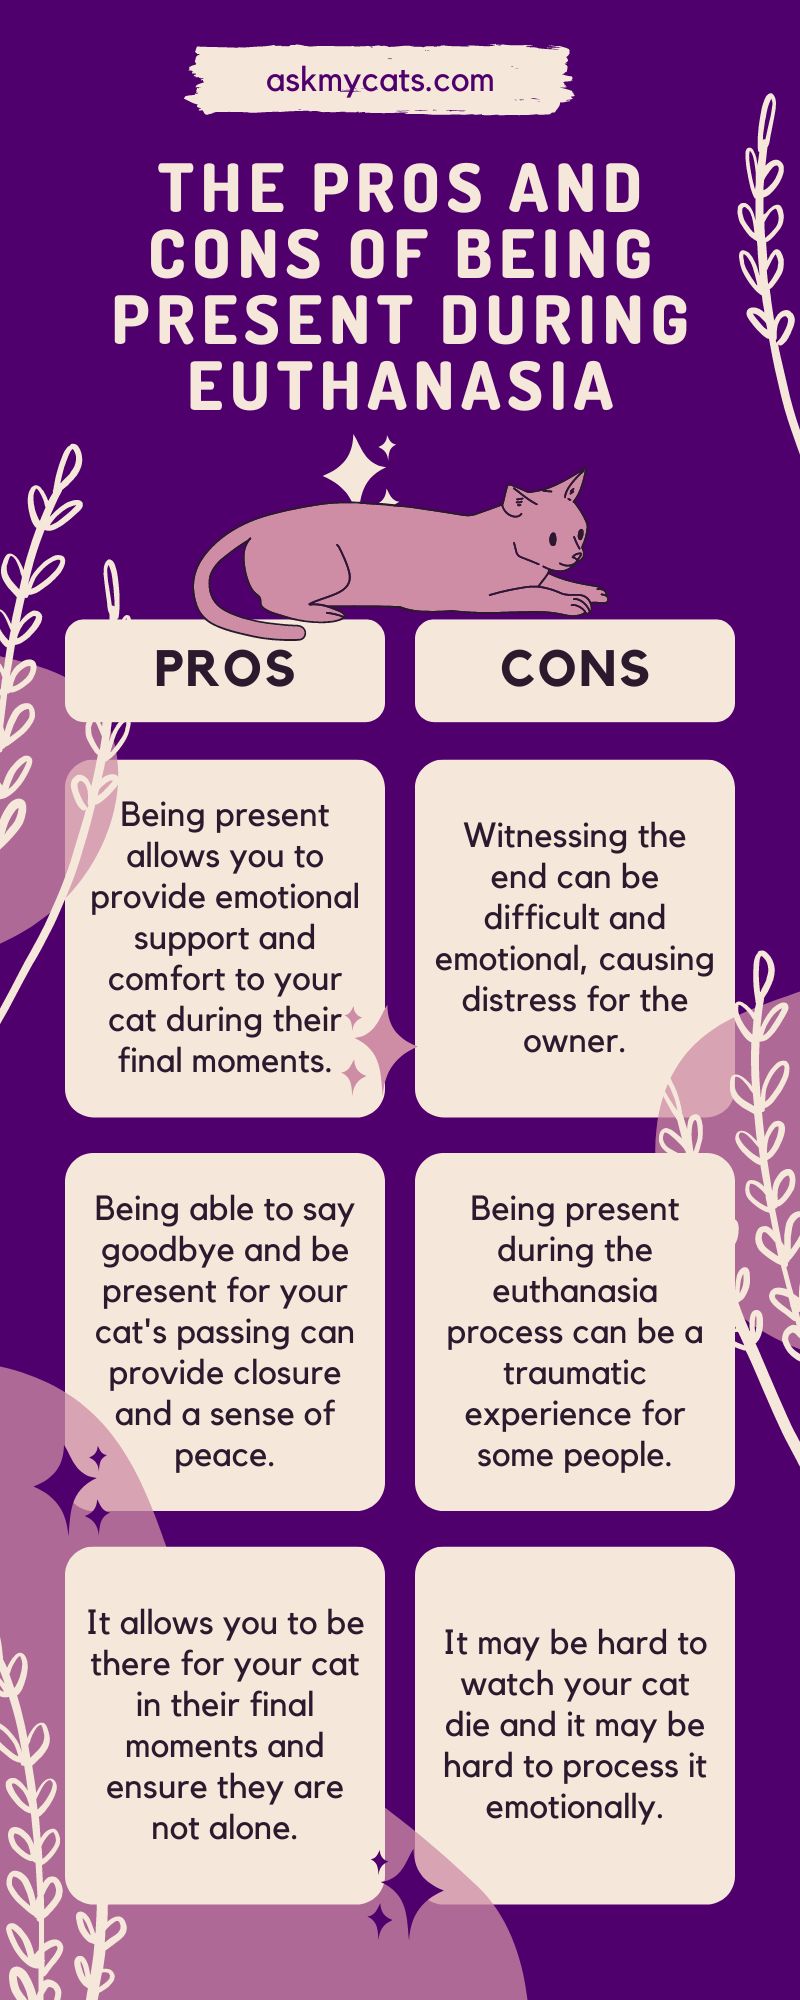 The Pros and Cons of Being Present During Euthanasia